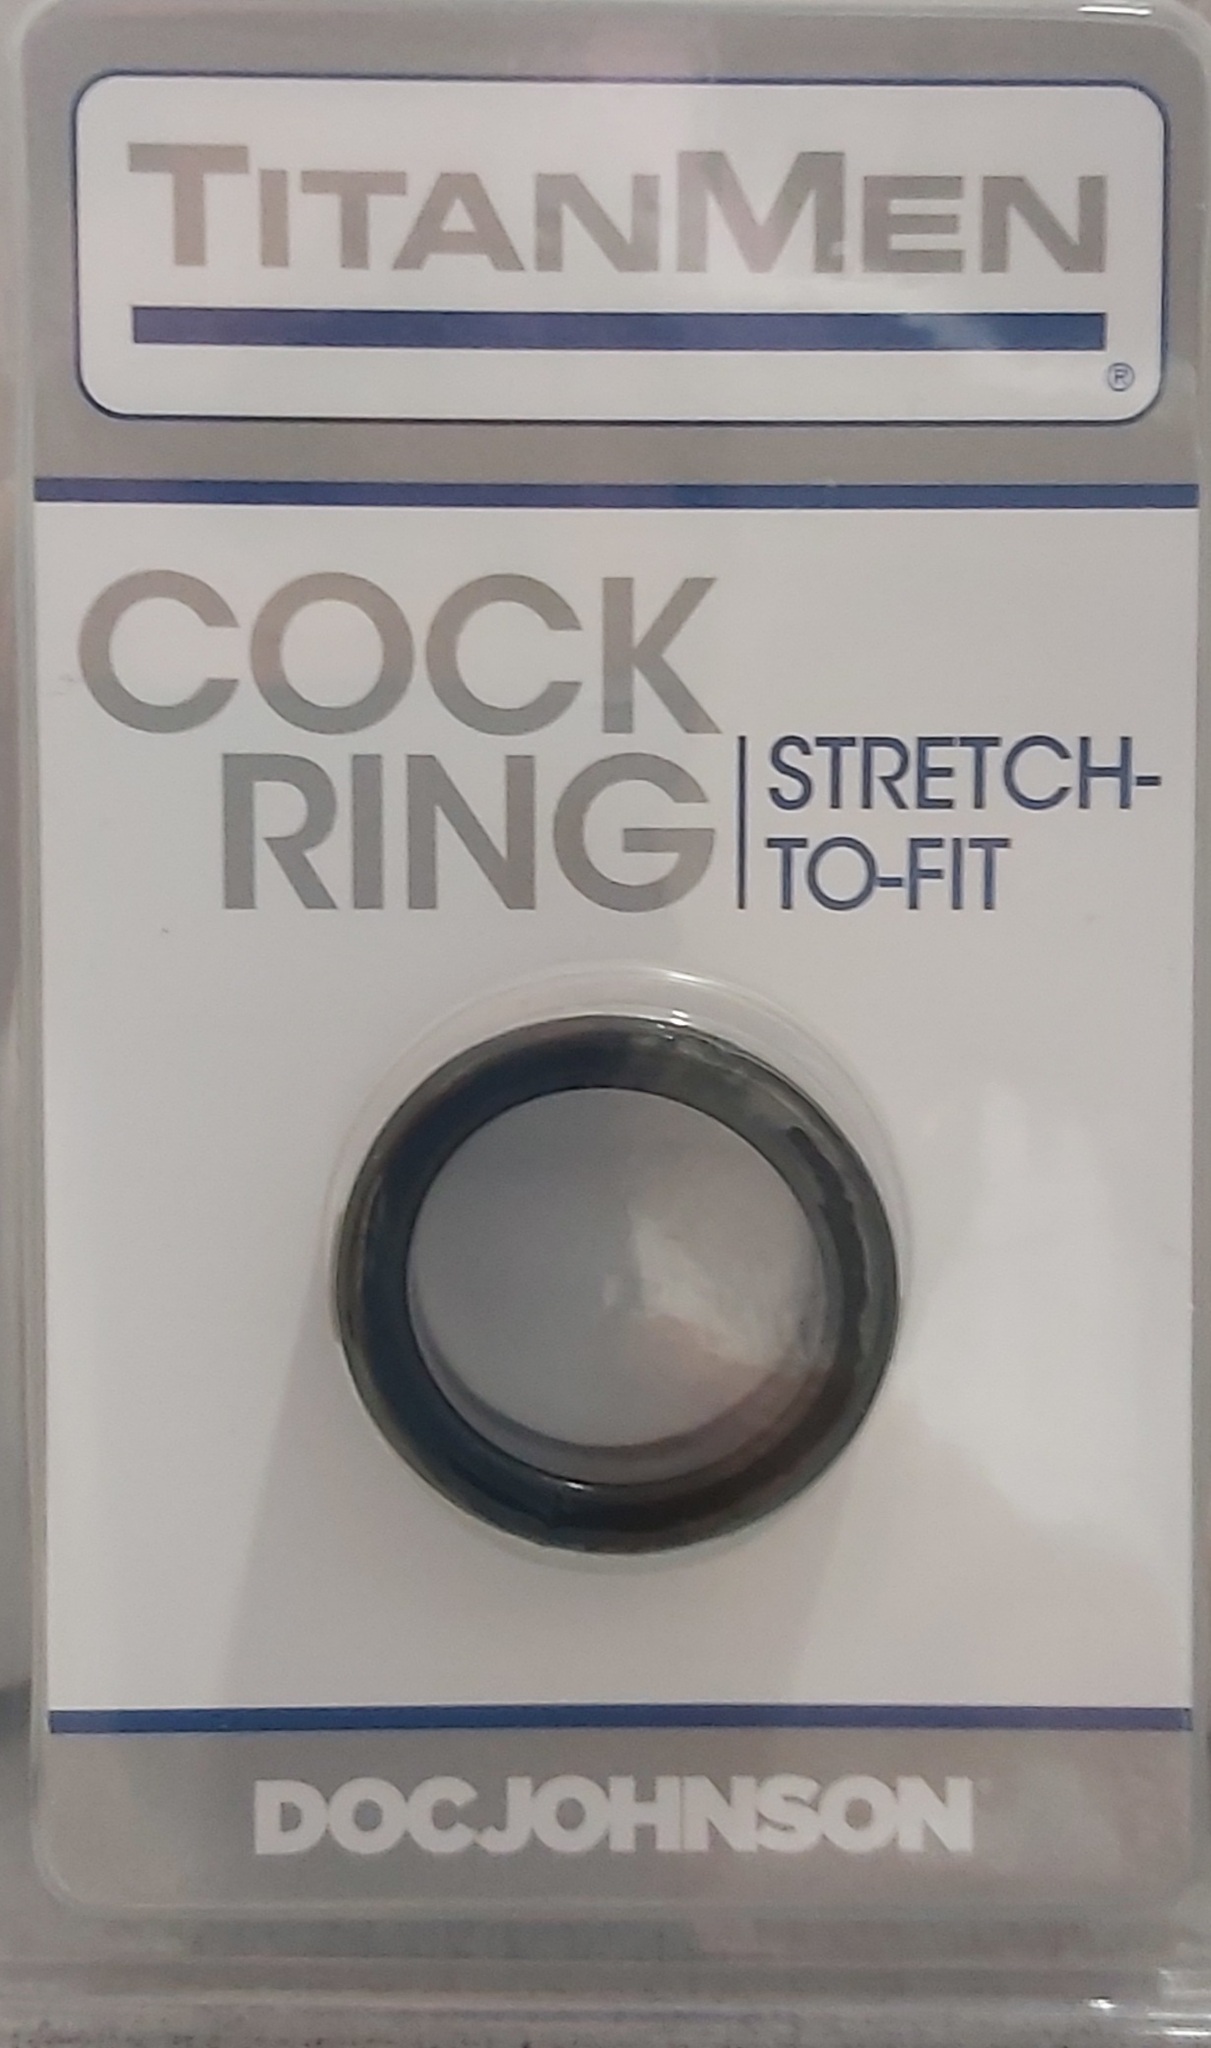 CockRing